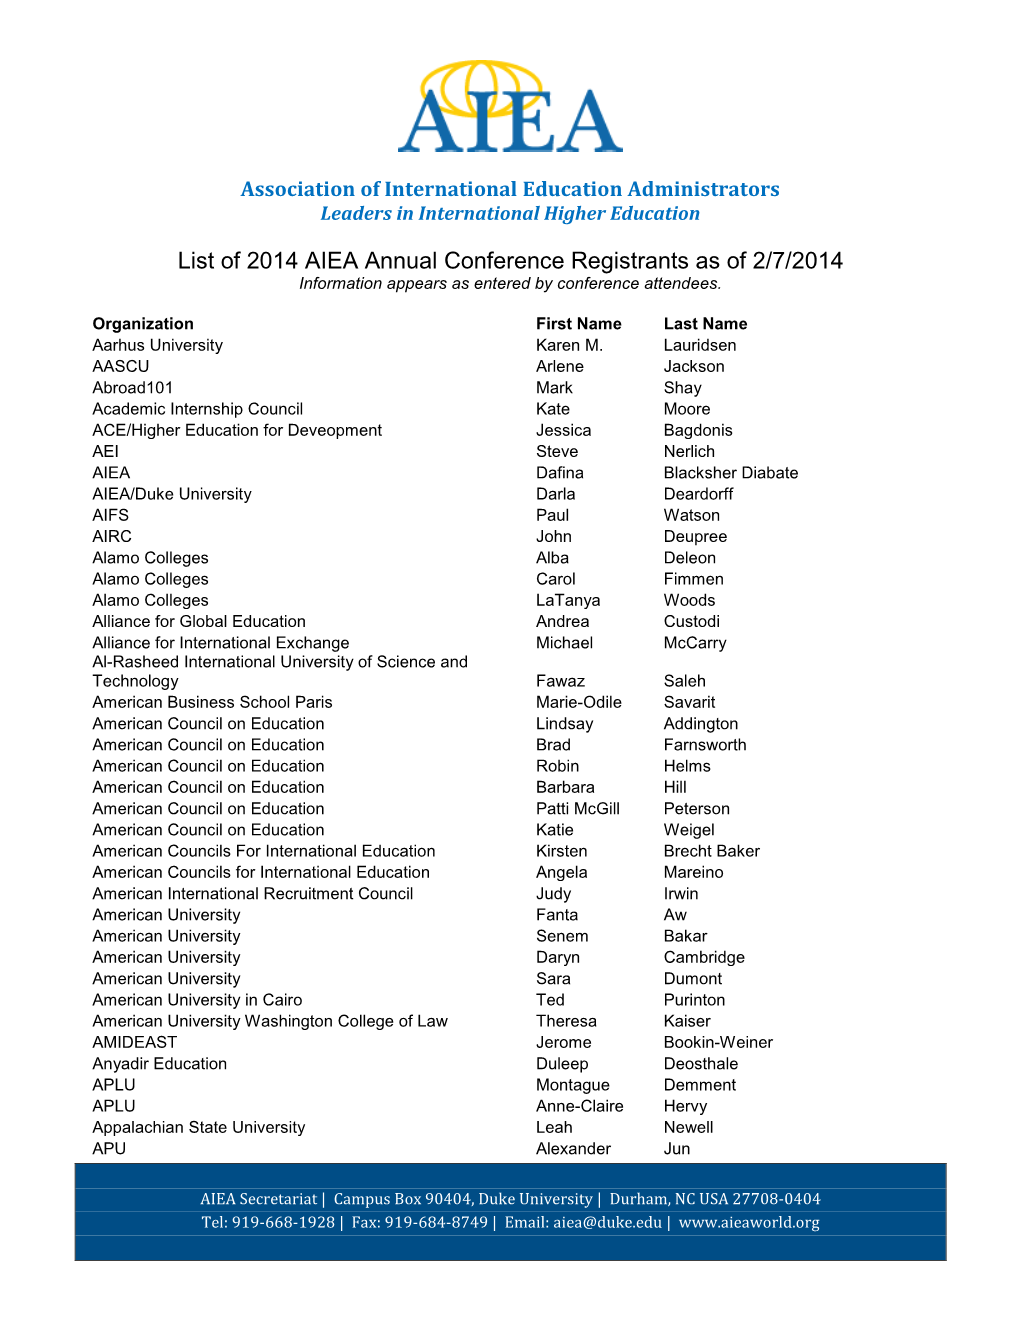 List of 2014 AIEA Annual Conference Registrants As of 2/7/2014 Information Appears As Entered by Conference Attendees